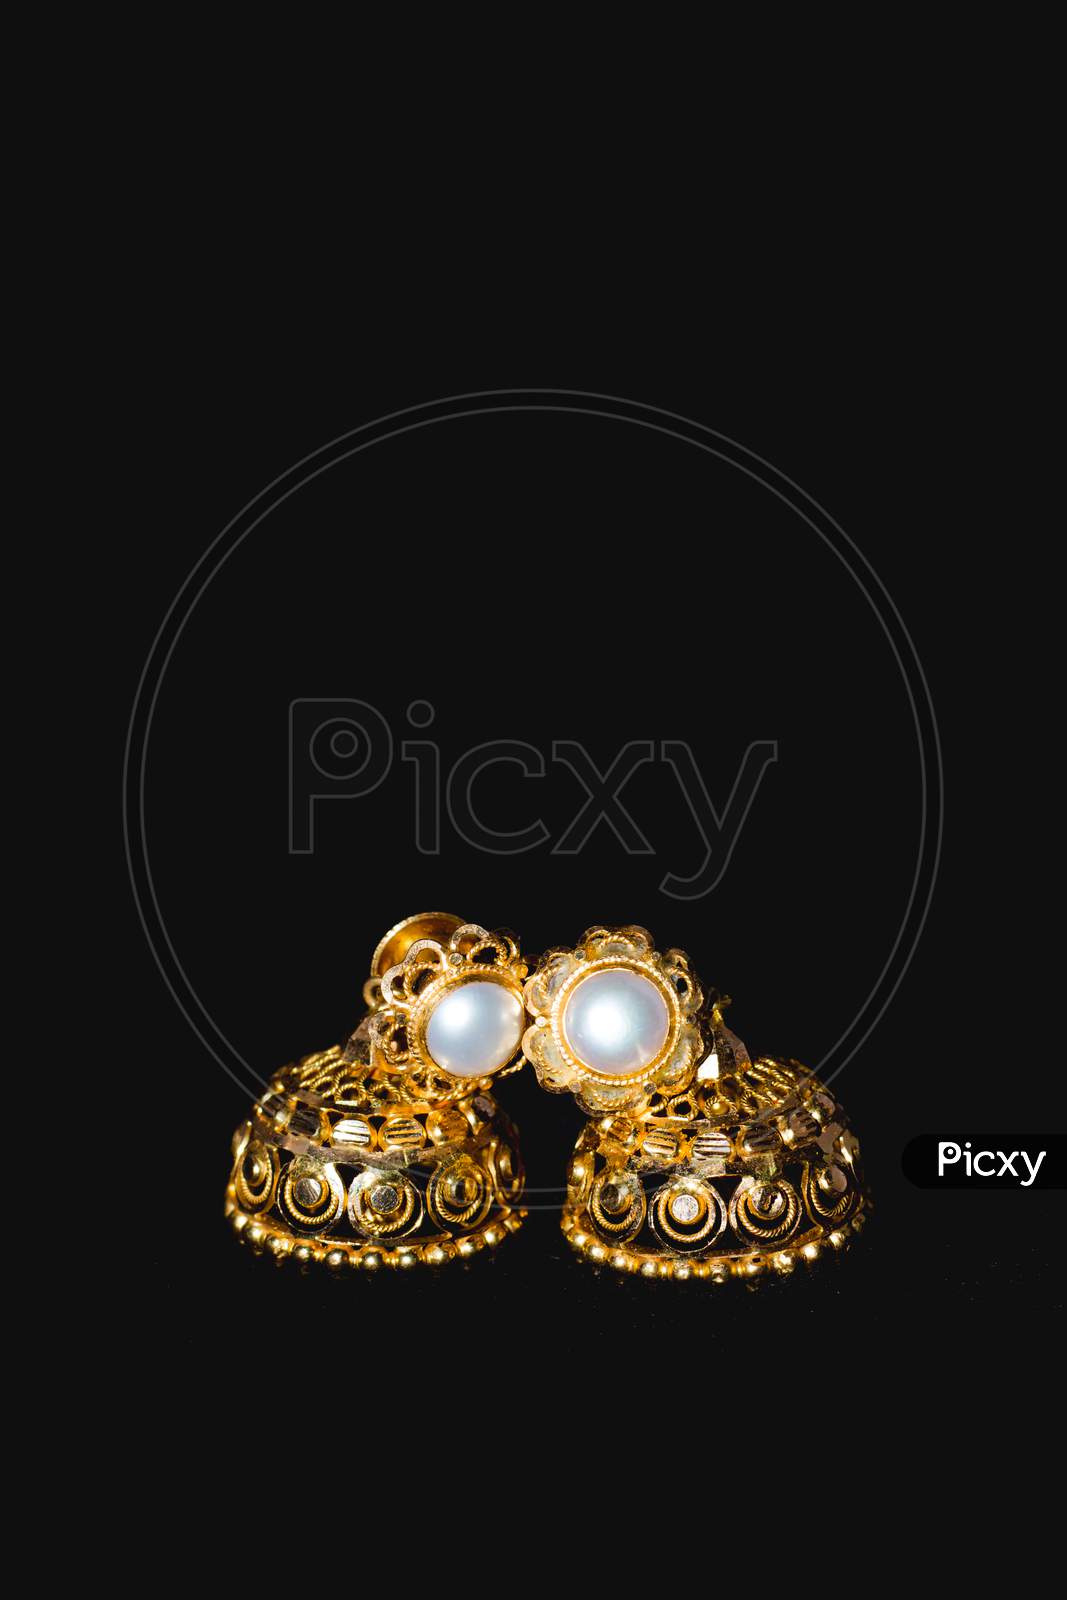 Earring Gold Jewelry Traditional With Stones And Two Golden Earrings With Reflection . Pair Of Golden Earring With Pearl Tone On Black Background. Luxury Female Jewelry, Close-Up